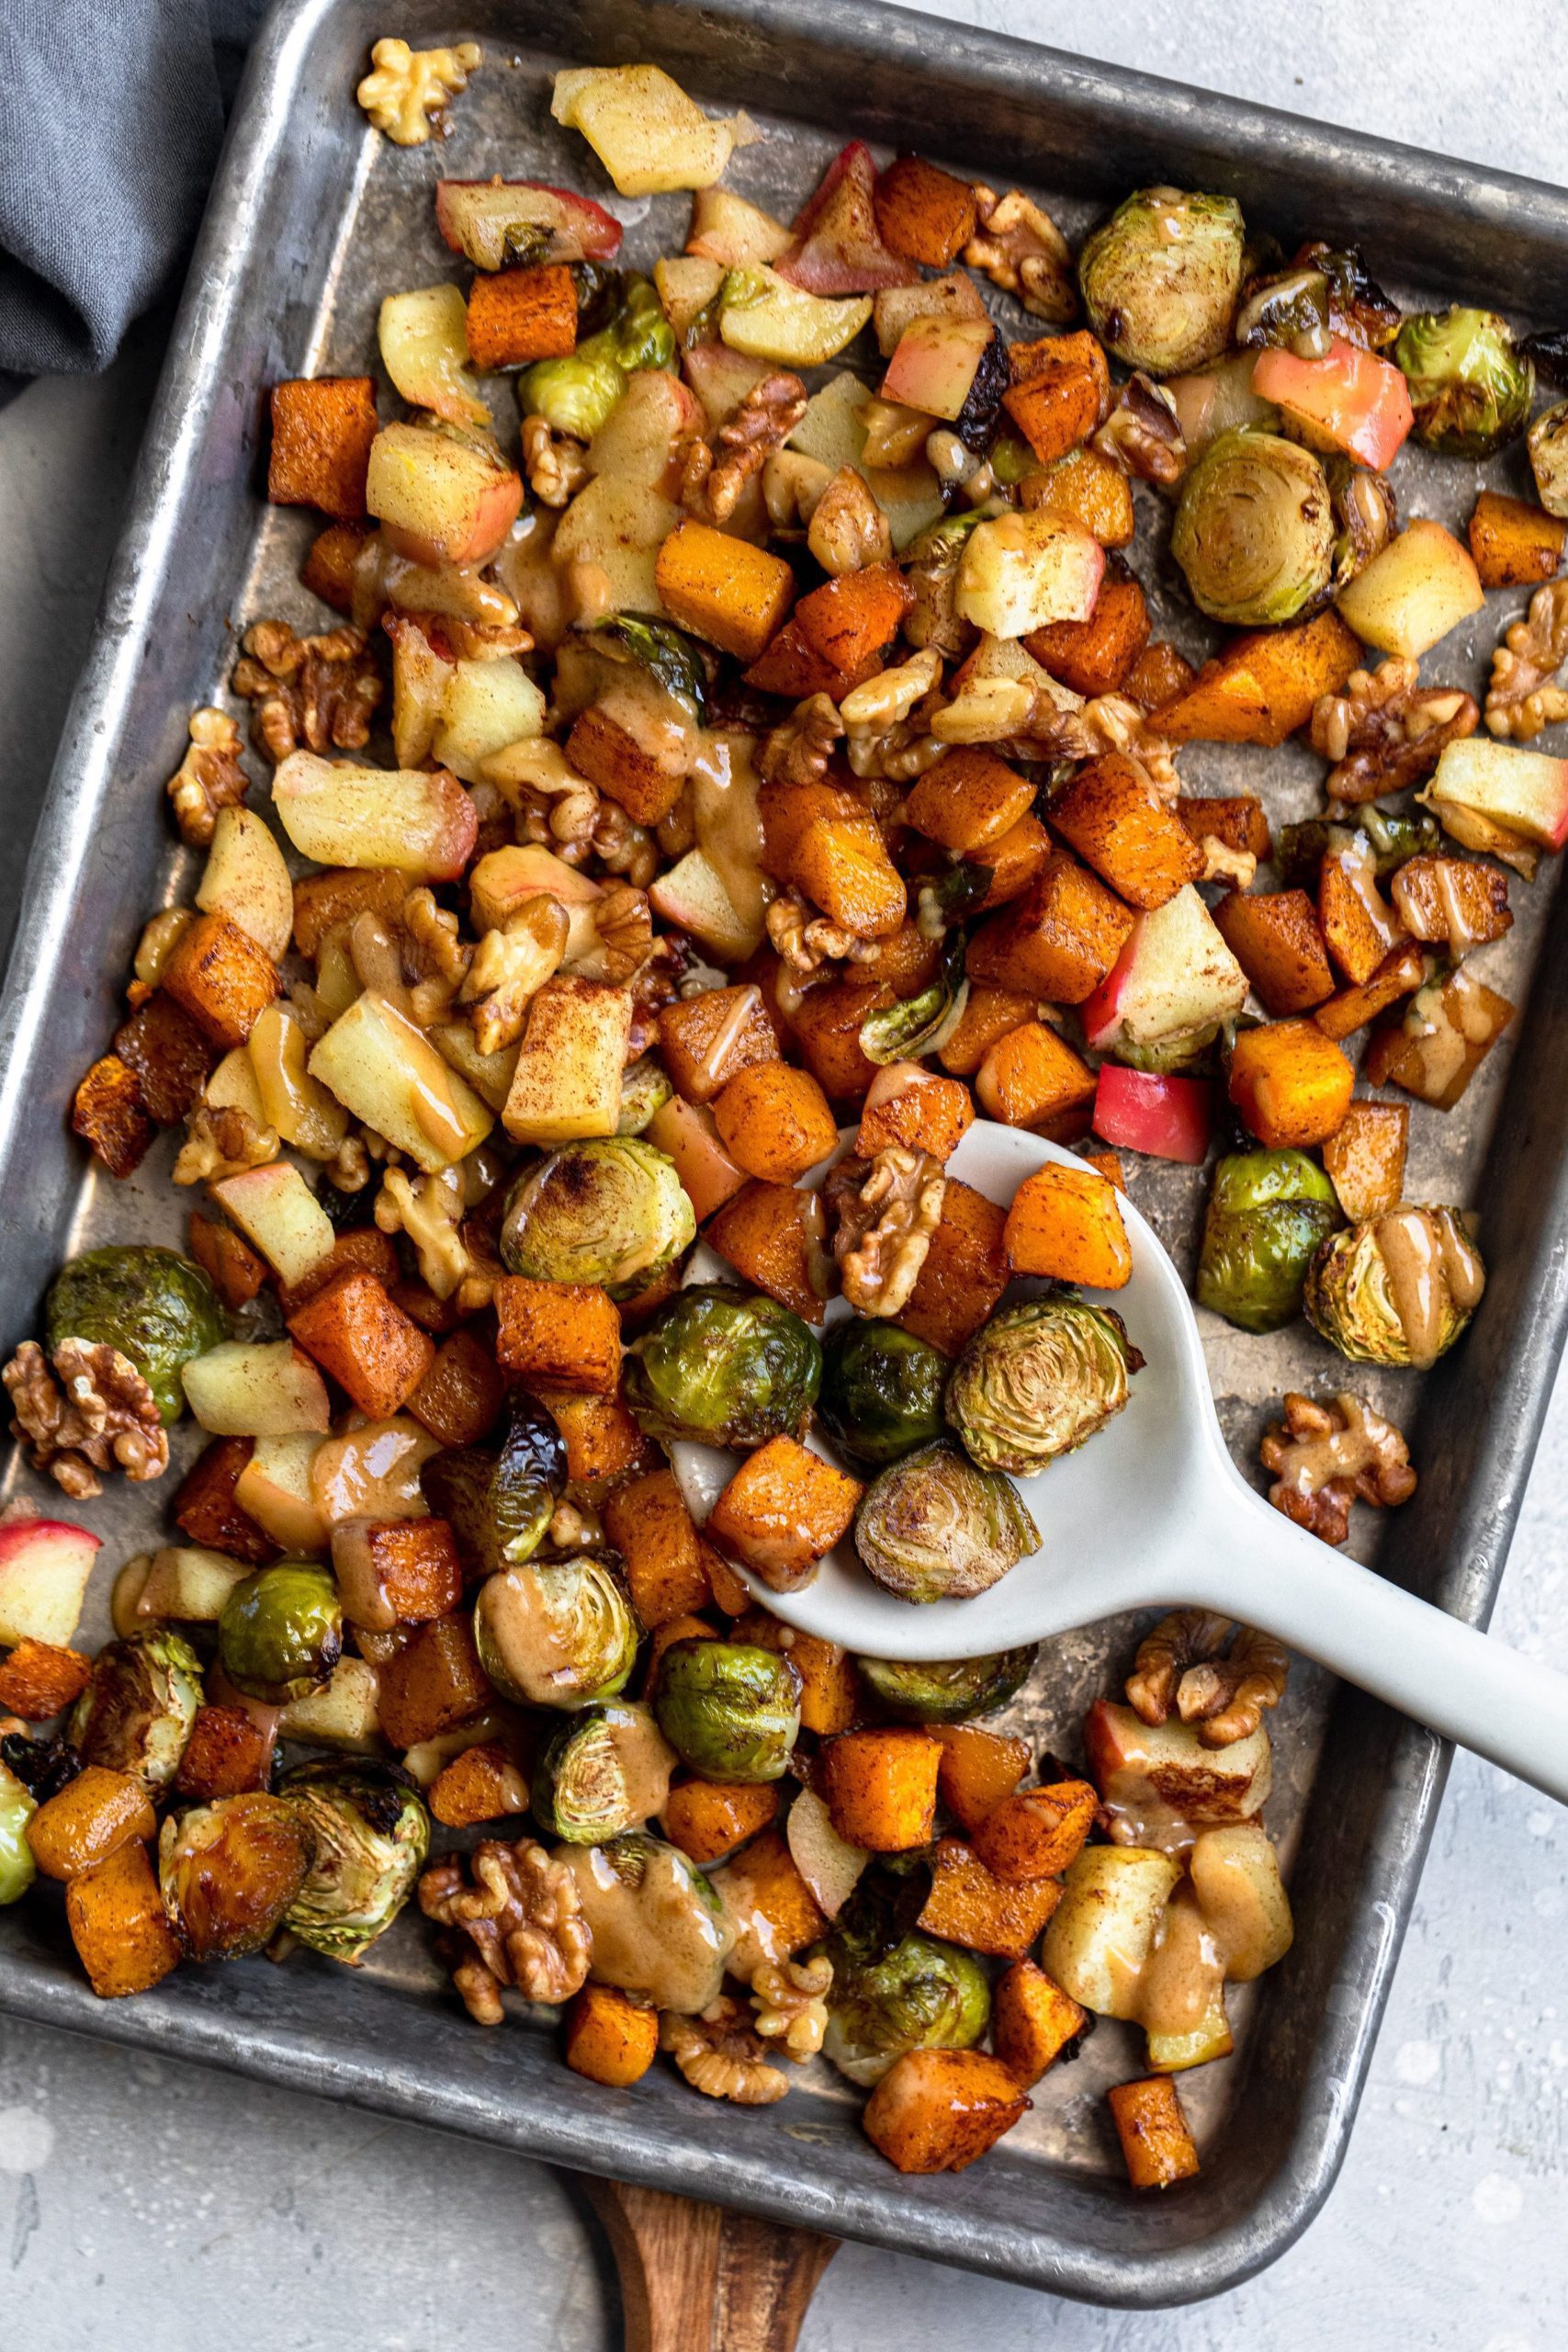 Sheet pan butternut squash, brussels sprouts, apples and walnuts with maple mustard sauce